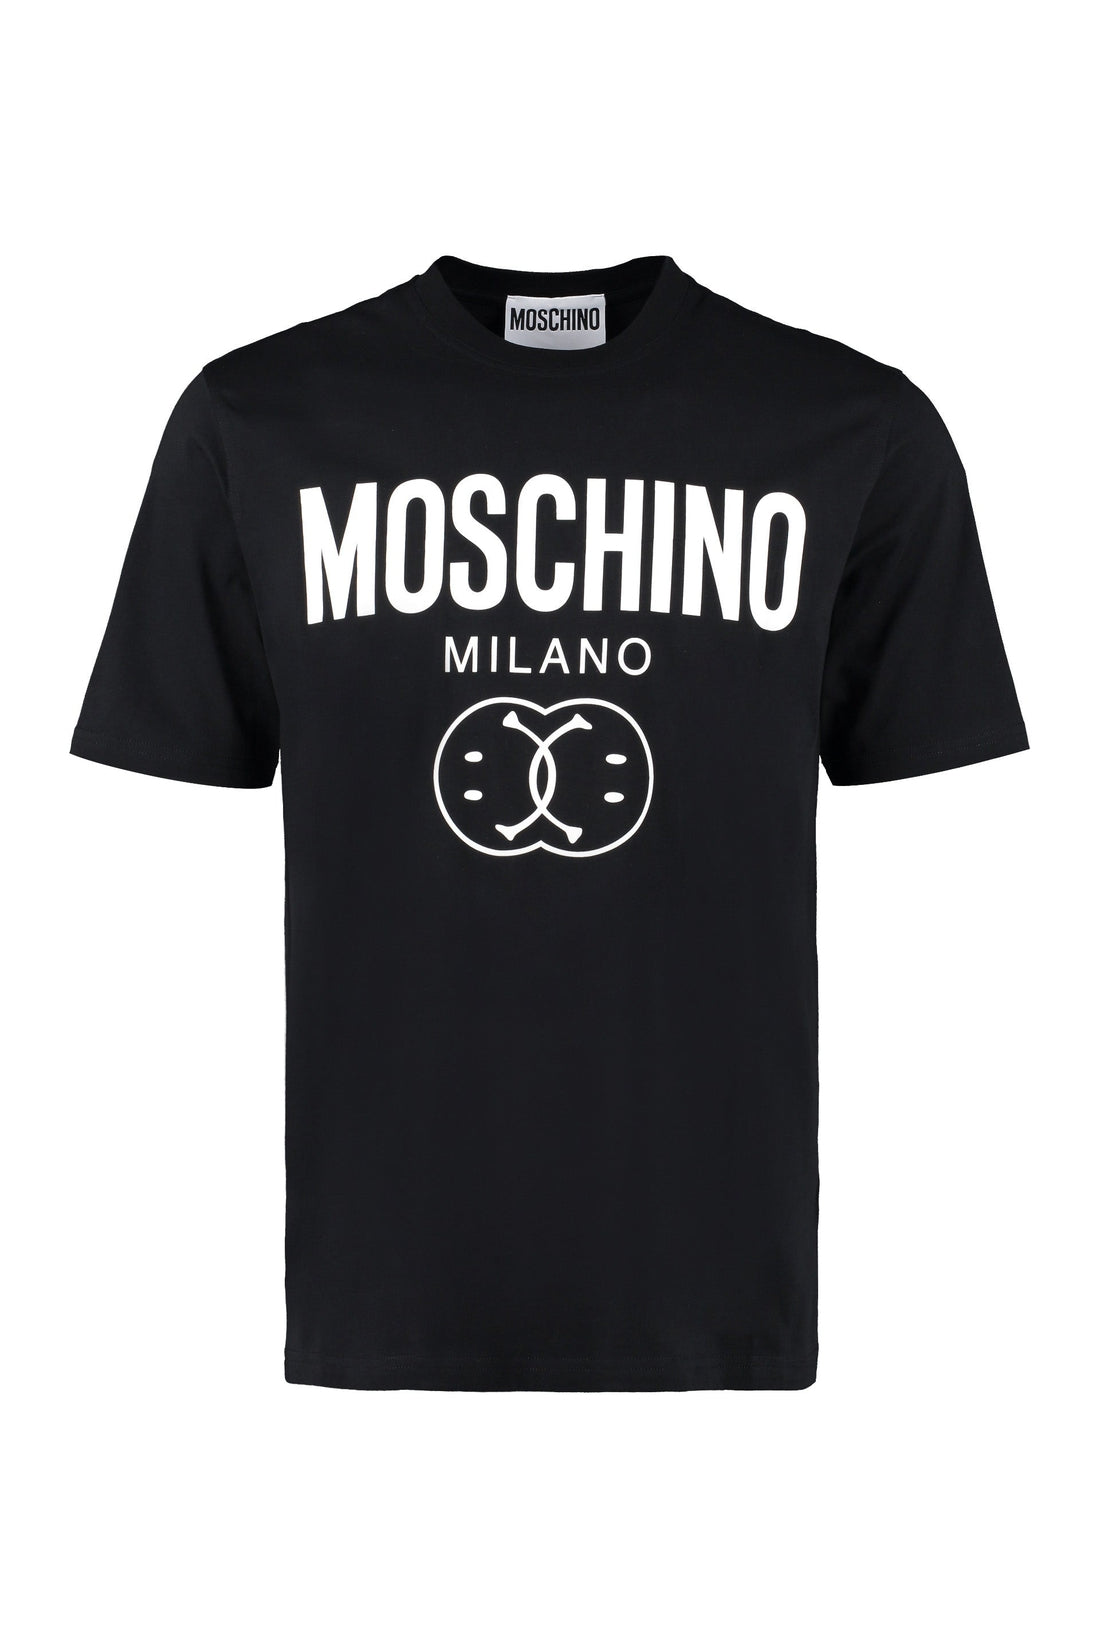 Moschino-OUTLET-SALE-Moschino Smiley printed cotton T-shirt-ARCHIVIST